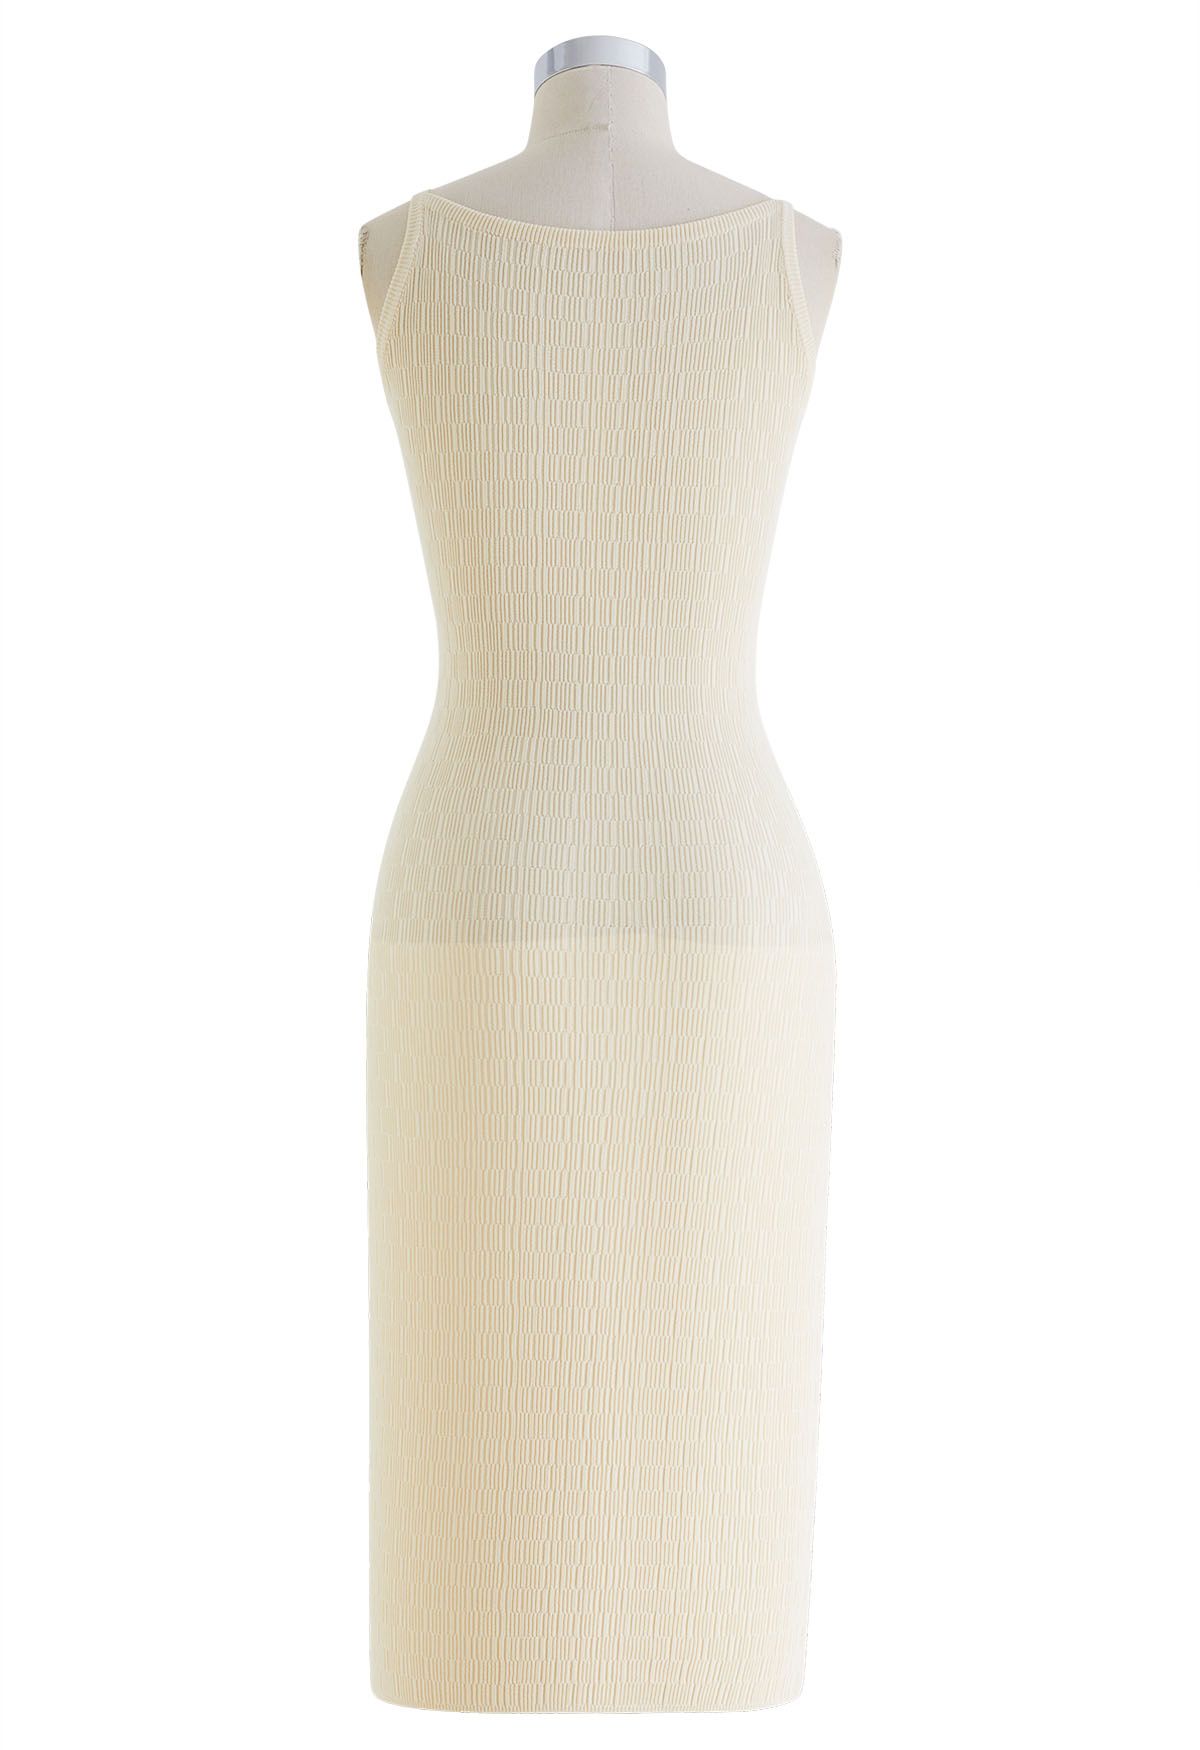 Solid Color Textured Knit Cami Dress in Cream